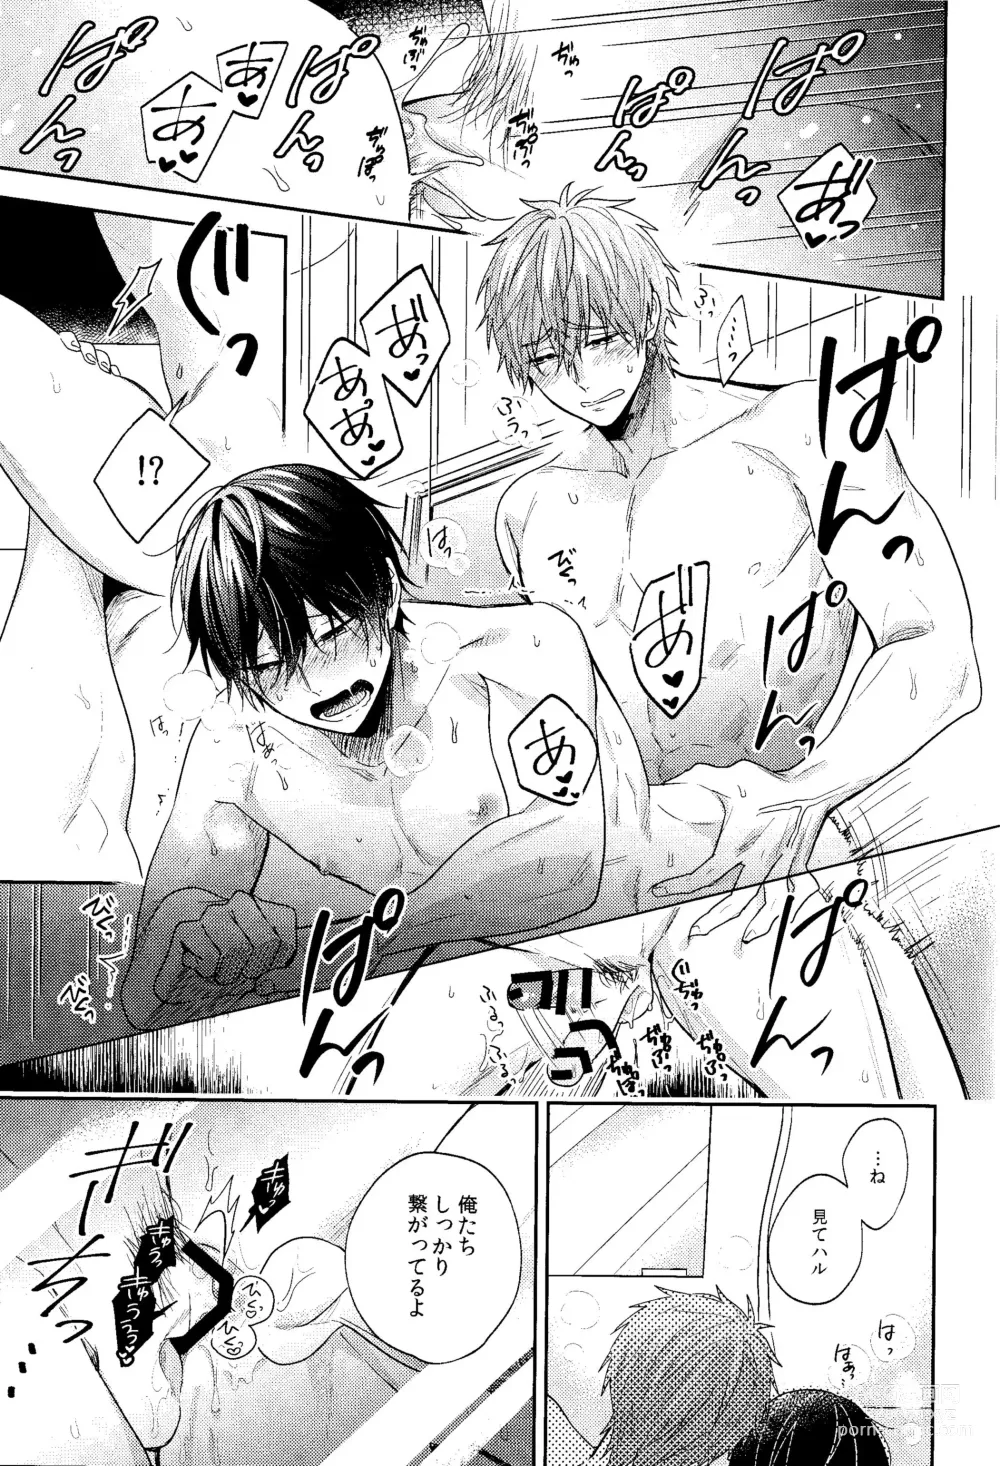 Page 14 of doujinshi Happy Birthday present is me